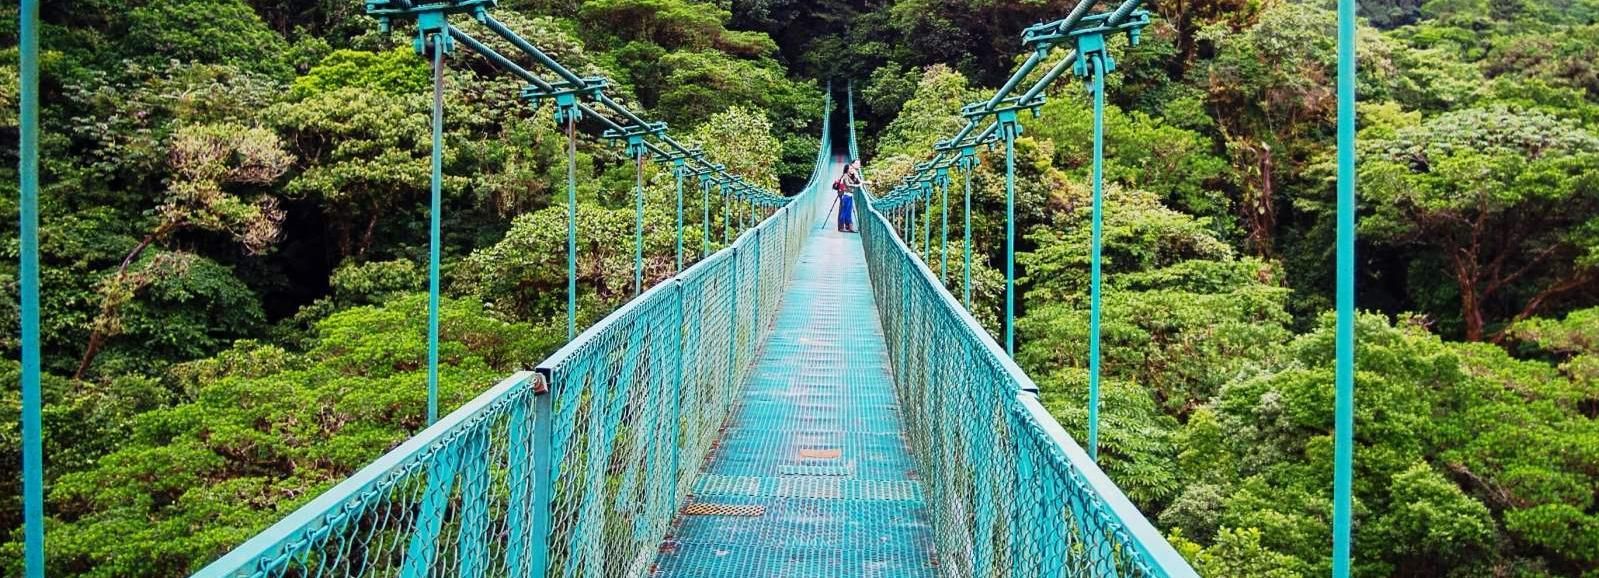 Monteverde 2021: Top 10 Tours & Activities (with Photos) - Things to Do ...